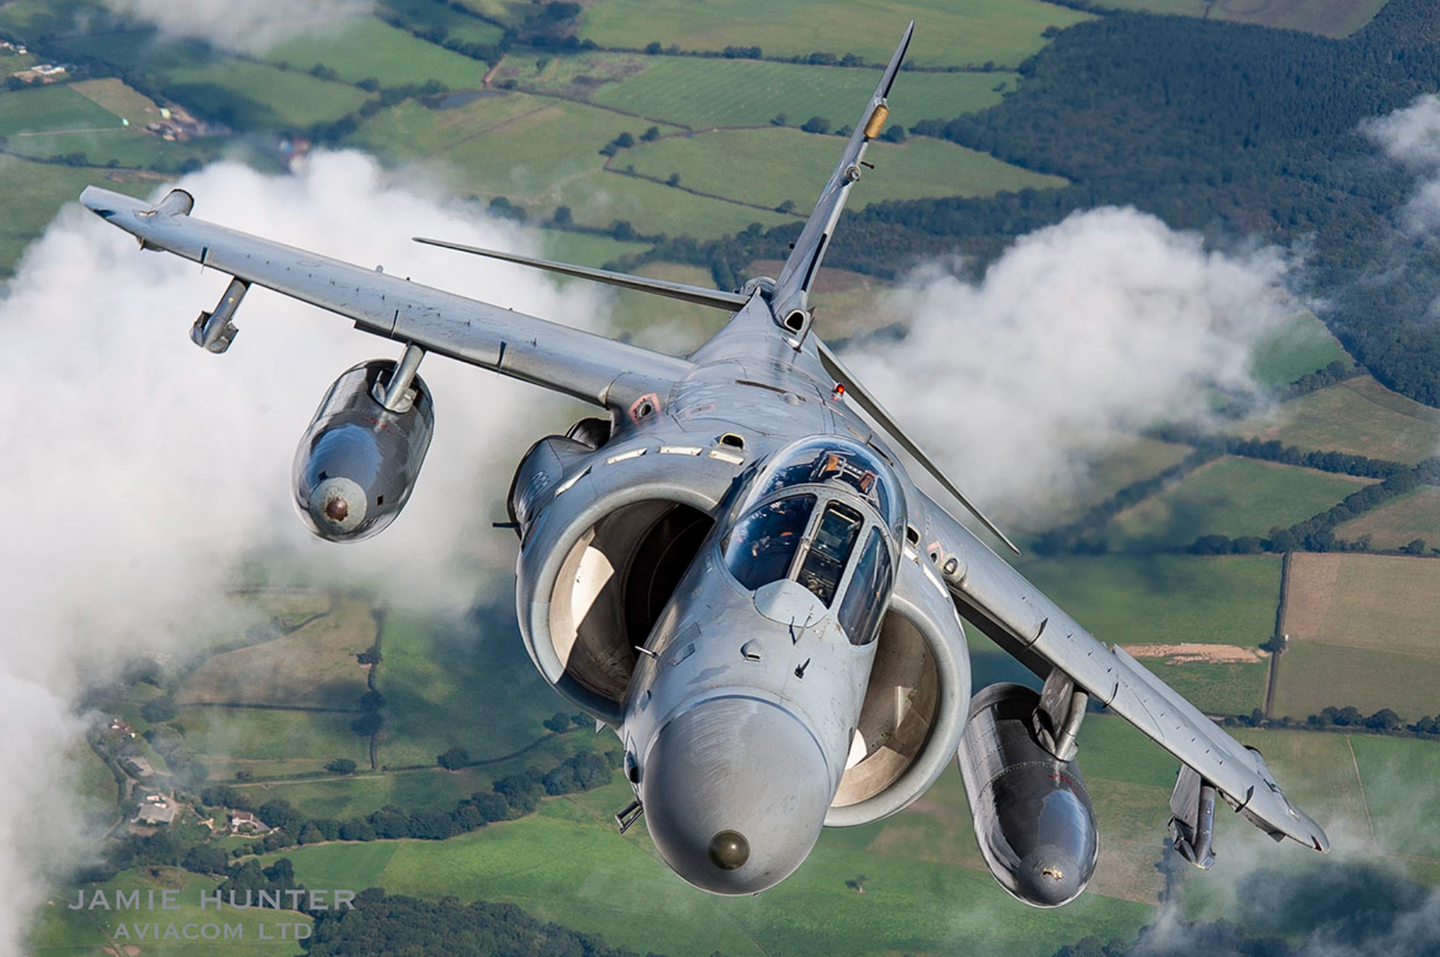 A Sea Harrier FA2 from 801 Naval Air Squadron, during the final months of this type’s service, in 2006. <em>Jamie Hunter</em><br><a href="https://twitter.com/jamie_aviacom/status/1318831820088147970"></a>